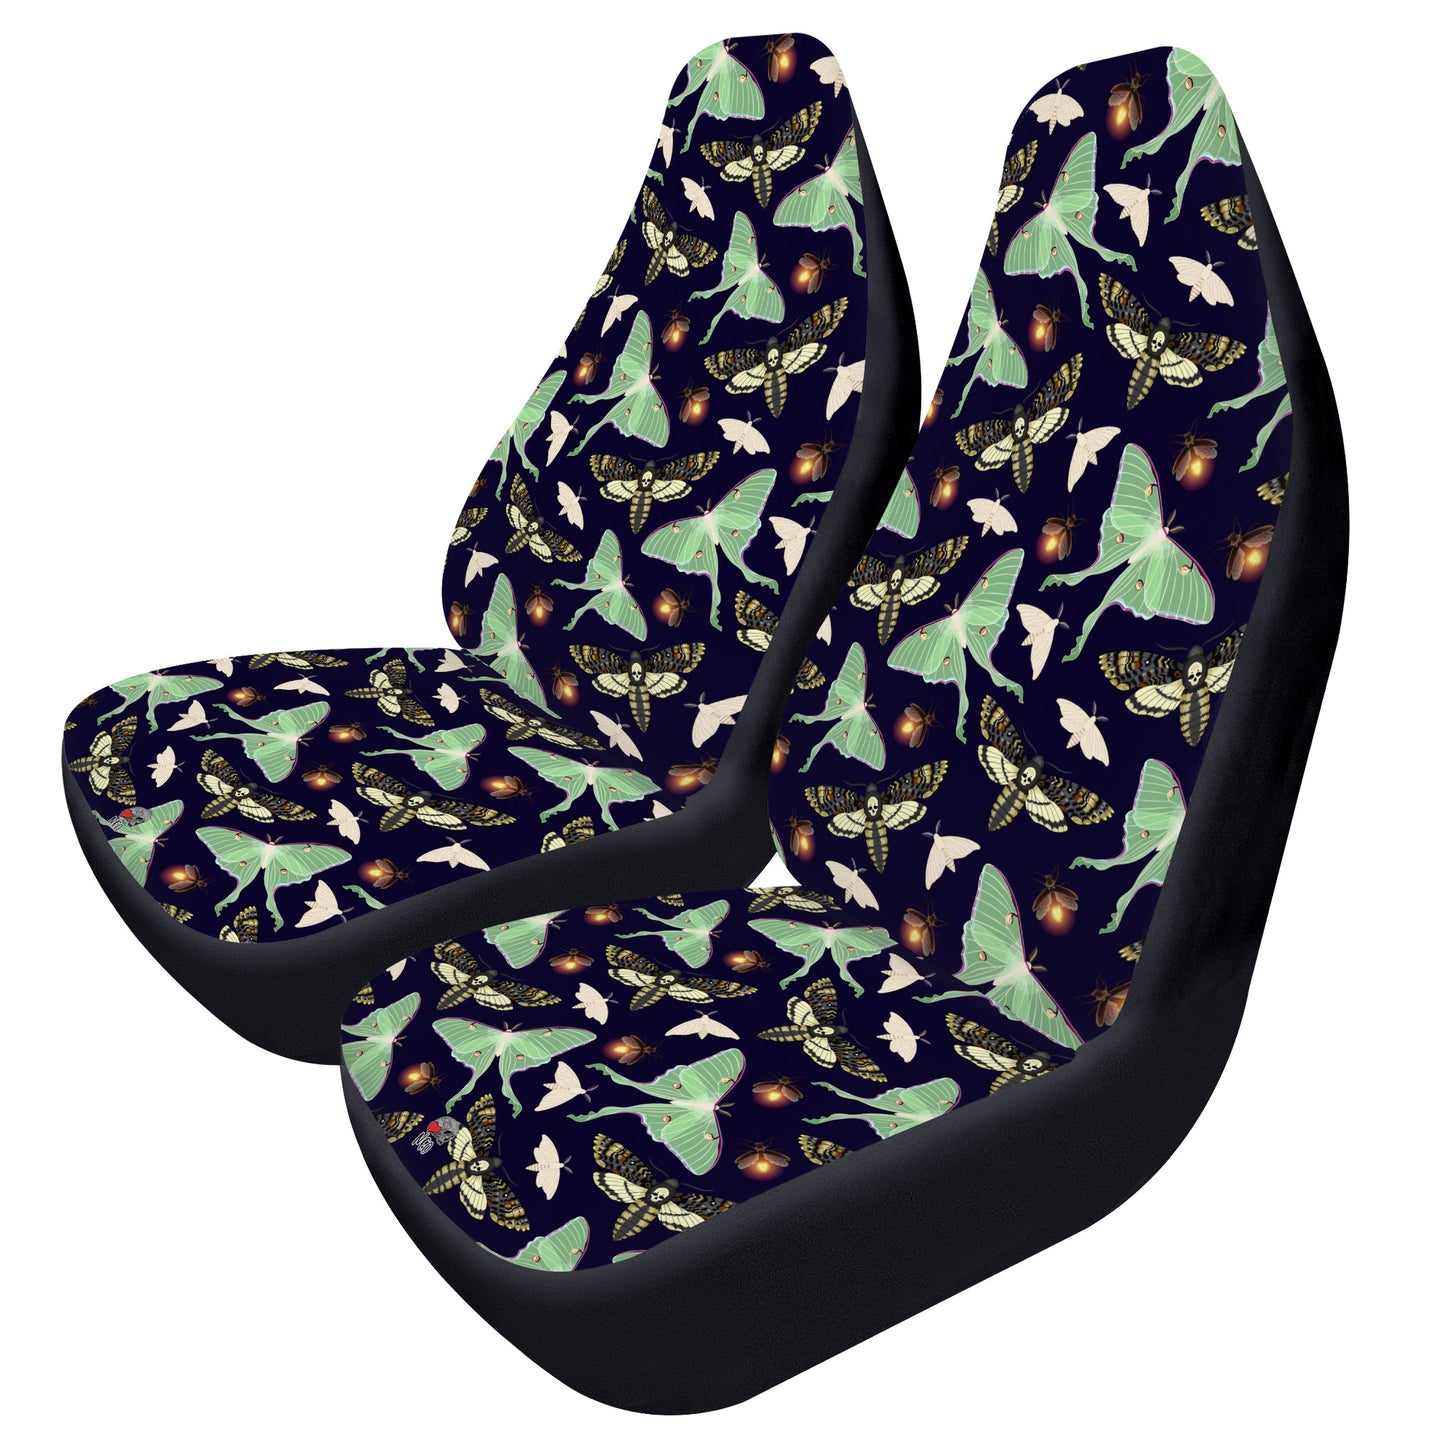 Lost Souls Car Seat Covers